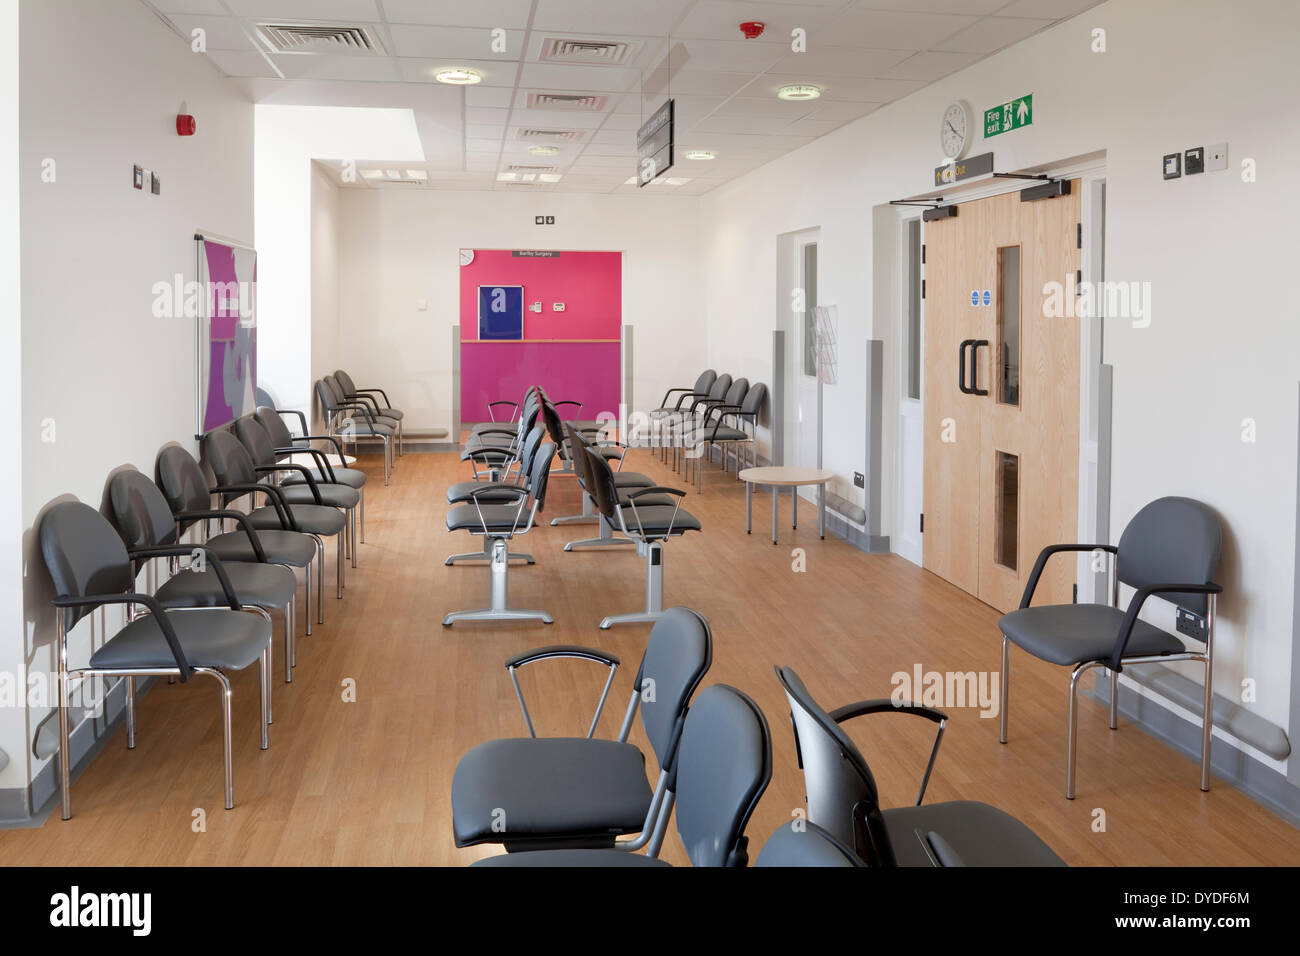 Unoccupied hospital waiting room. Stock Photo